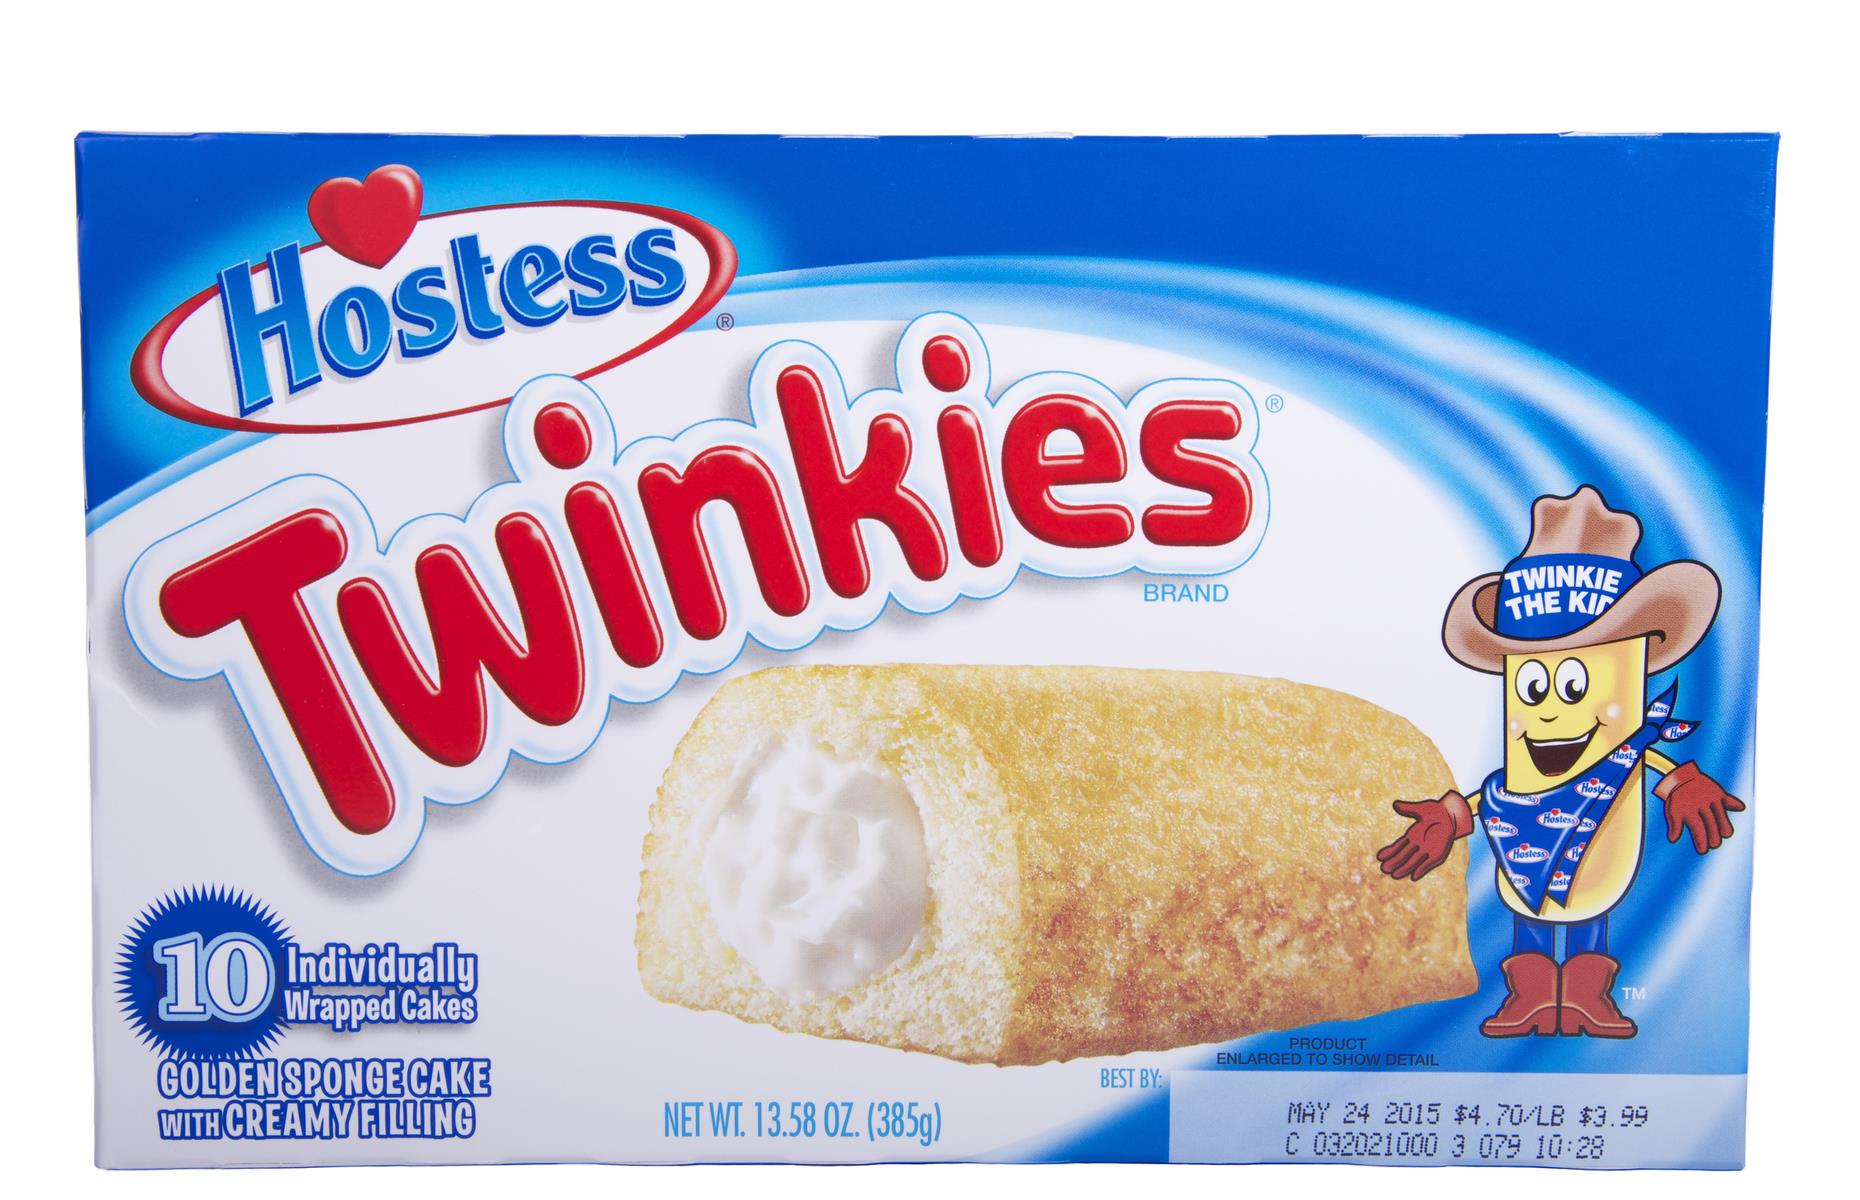 Metropoulos & Co swallow up Twinkies